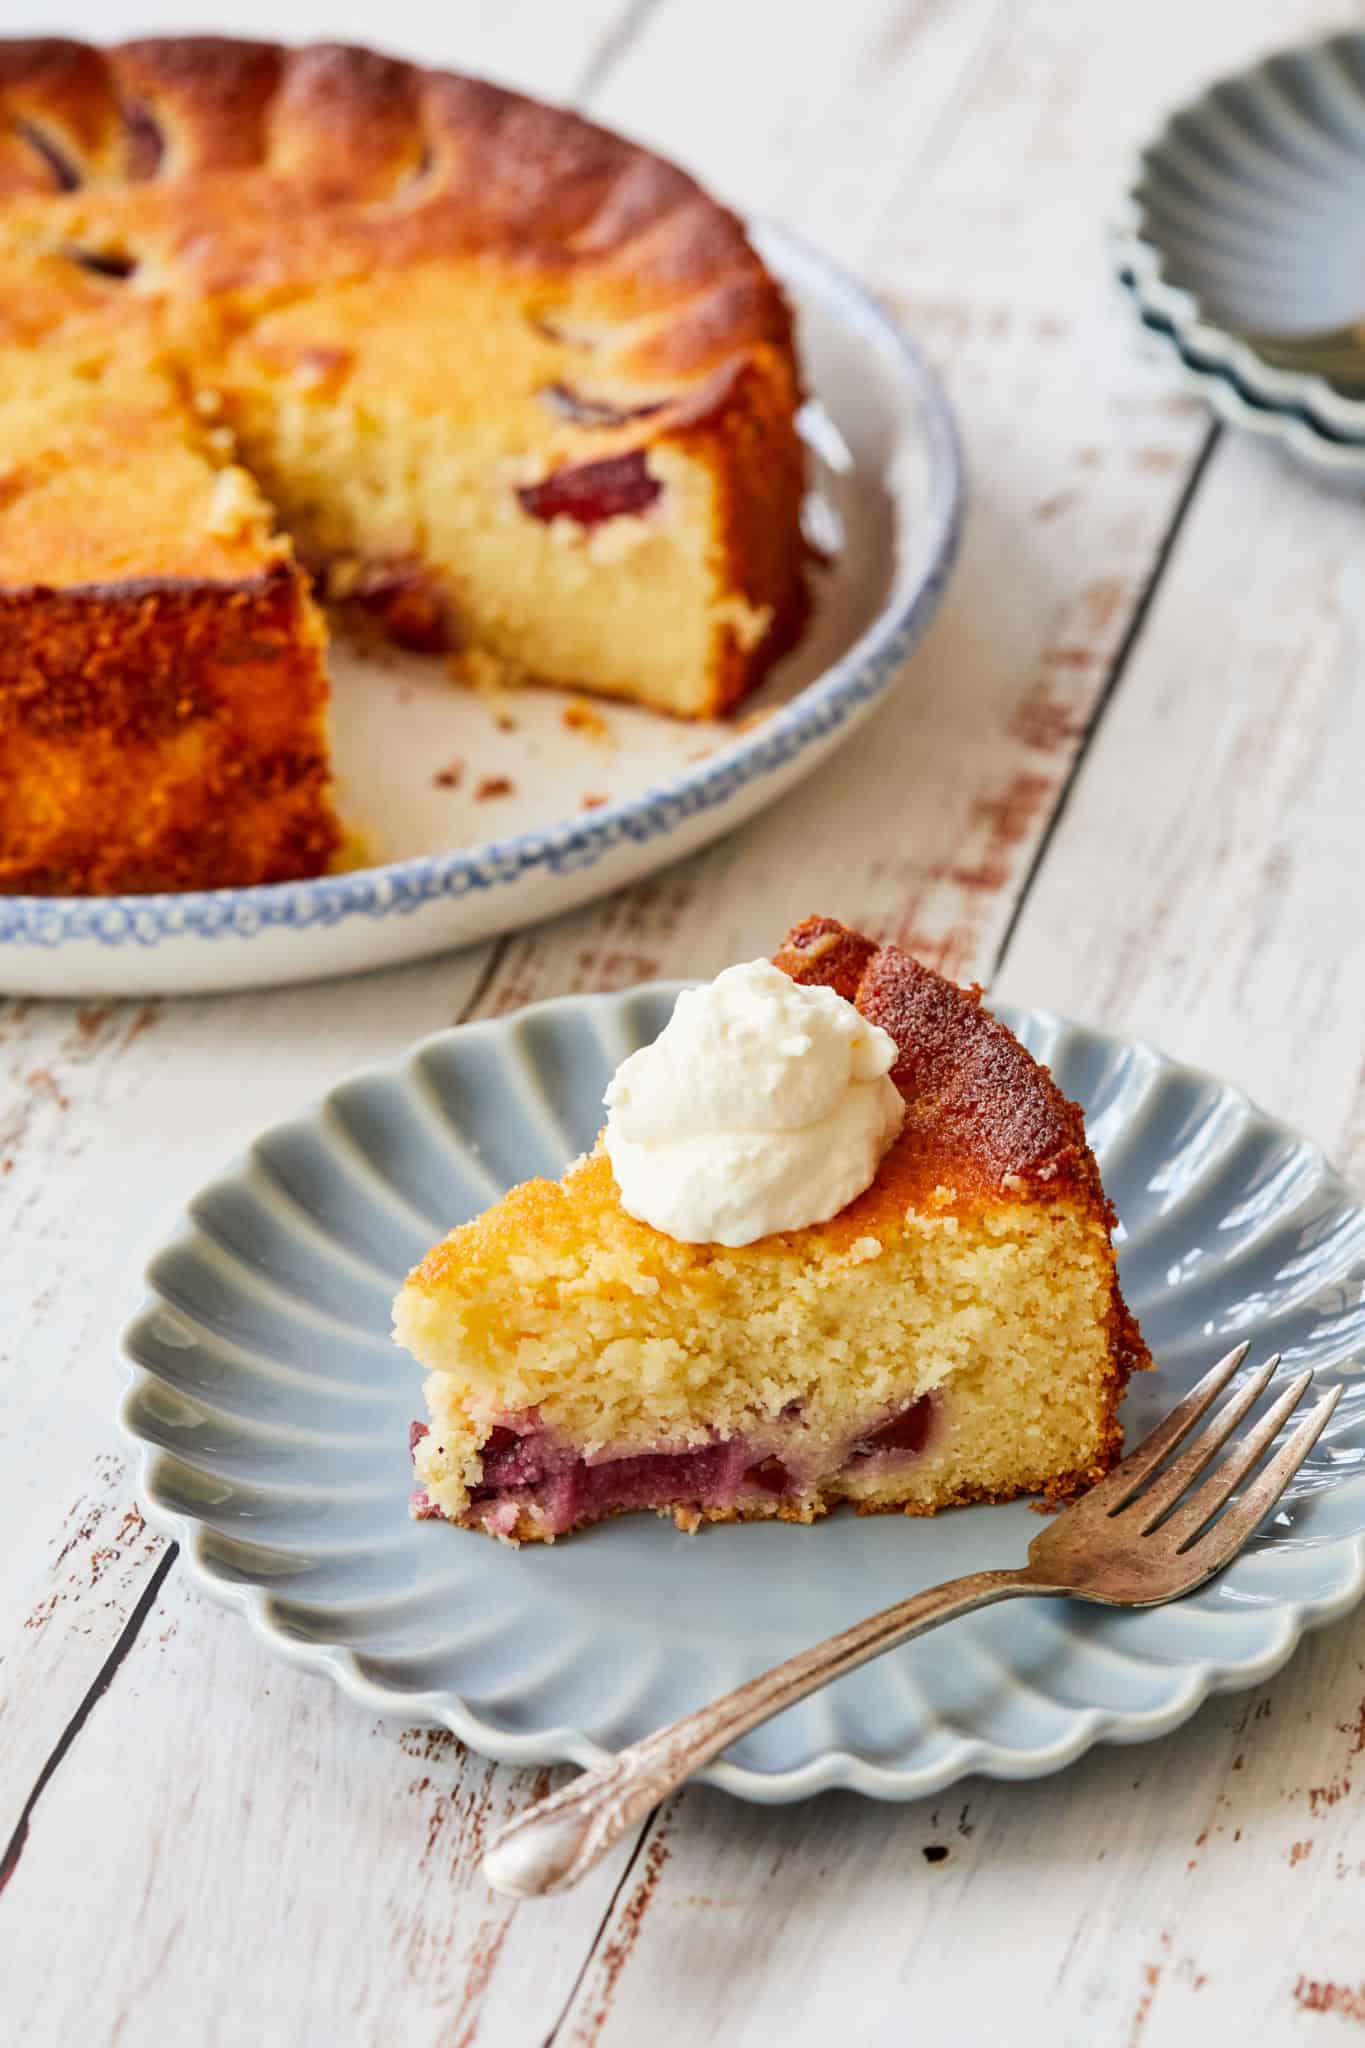 A close-up image of Italian Ricotta Cake which shows the baked black plums. It is served with fresh whipped cream. In the background of the photo is the rest of the circular cake.